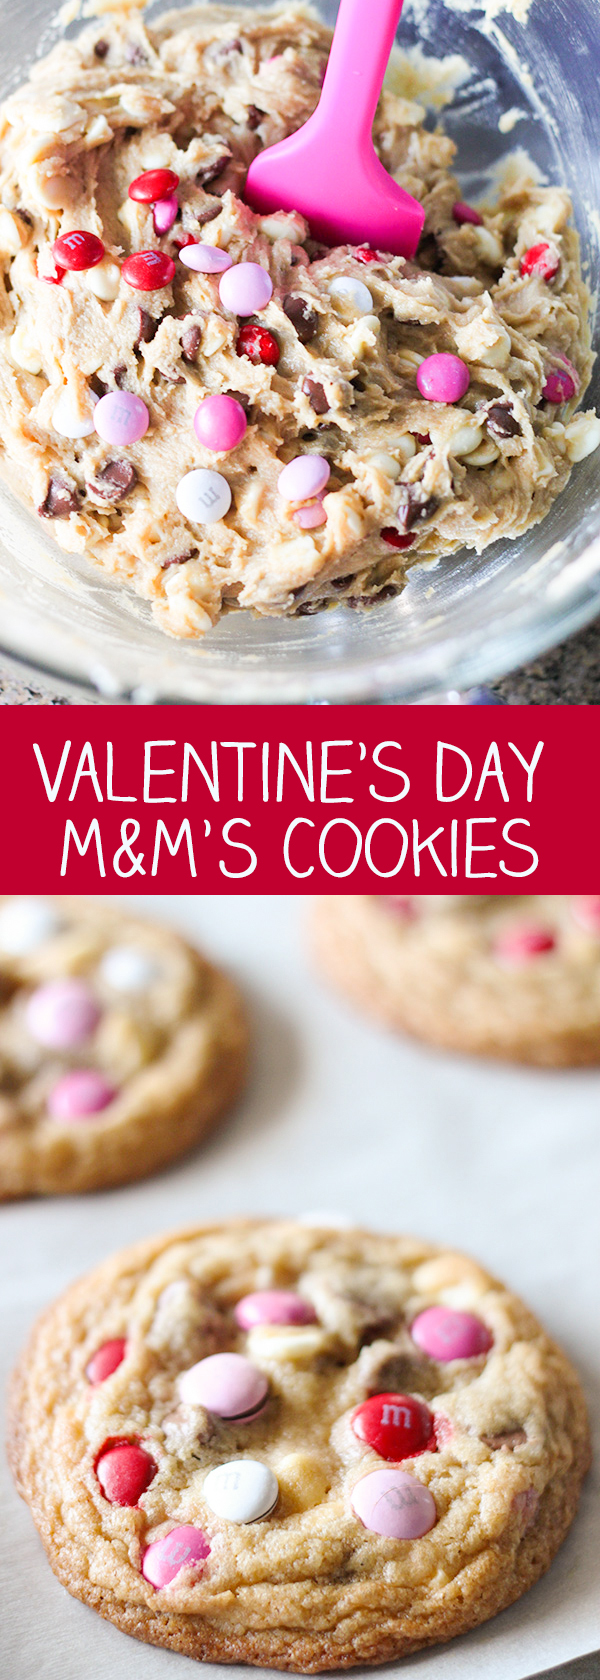 Valentine's Day M&M'S Cookies - loaded with M&M's, white chocolate chips and milk chocolate chips. 